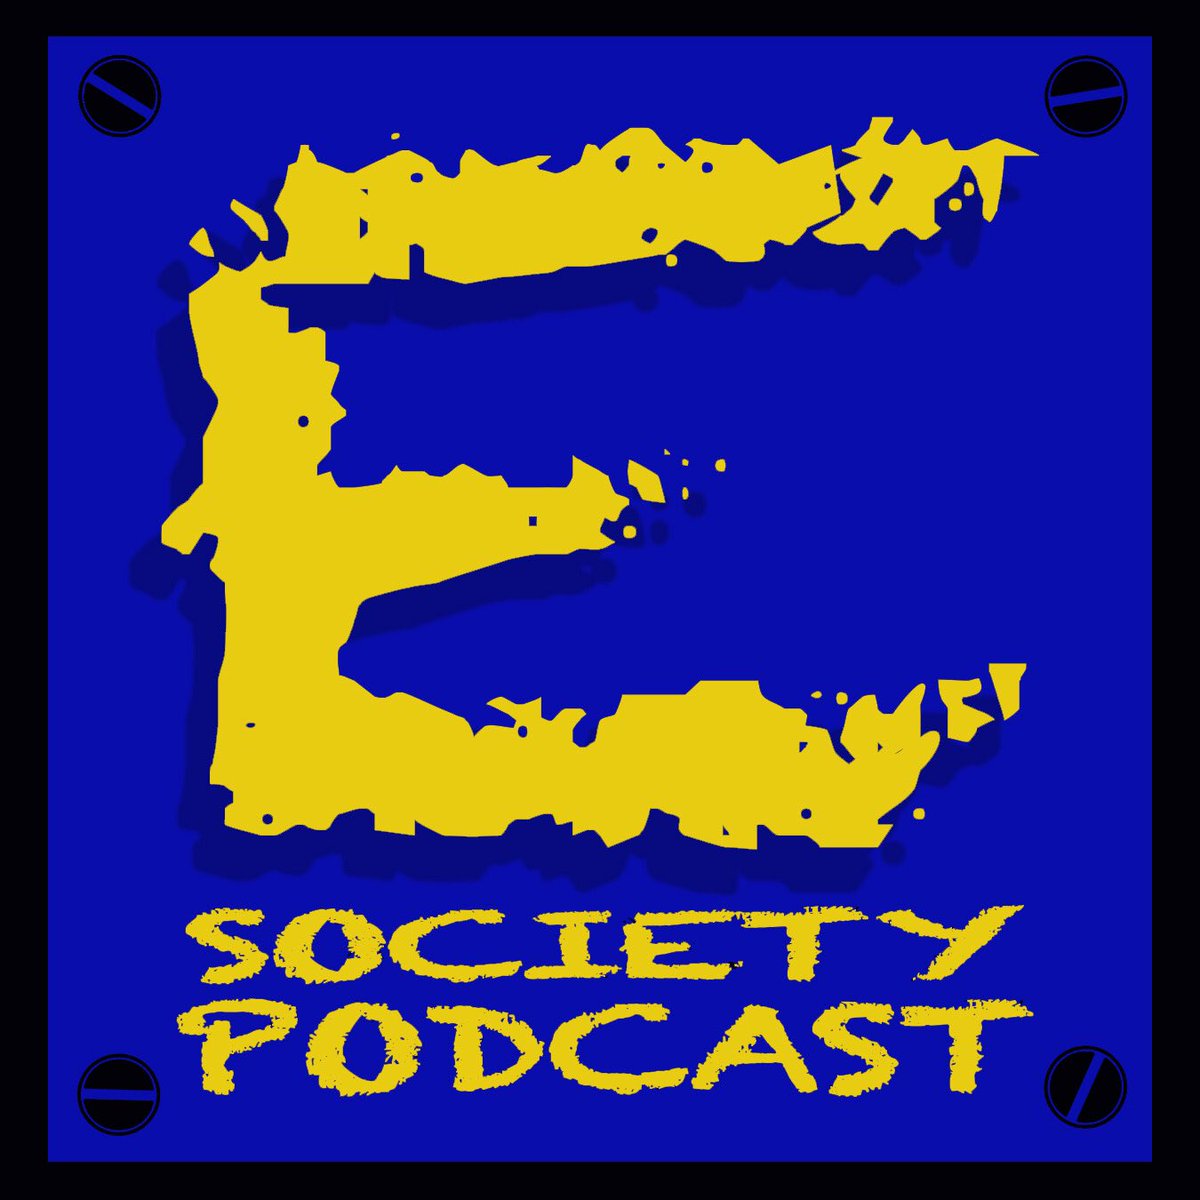 #ESociety Podcast - Ep. #309: The ESP Circle Is Now Available At podbean.com/pu/pbblog-p3n5…. #SK8ERNezPodcastNetwork #ESP #Movies #TVShows #Comics #Toys #Collectibles #Funko #StarWars #Music #Entertainment #PopCulture #Podcast #Podcasting #PodLife #PodernFamily #PodcastHQ #PodNation